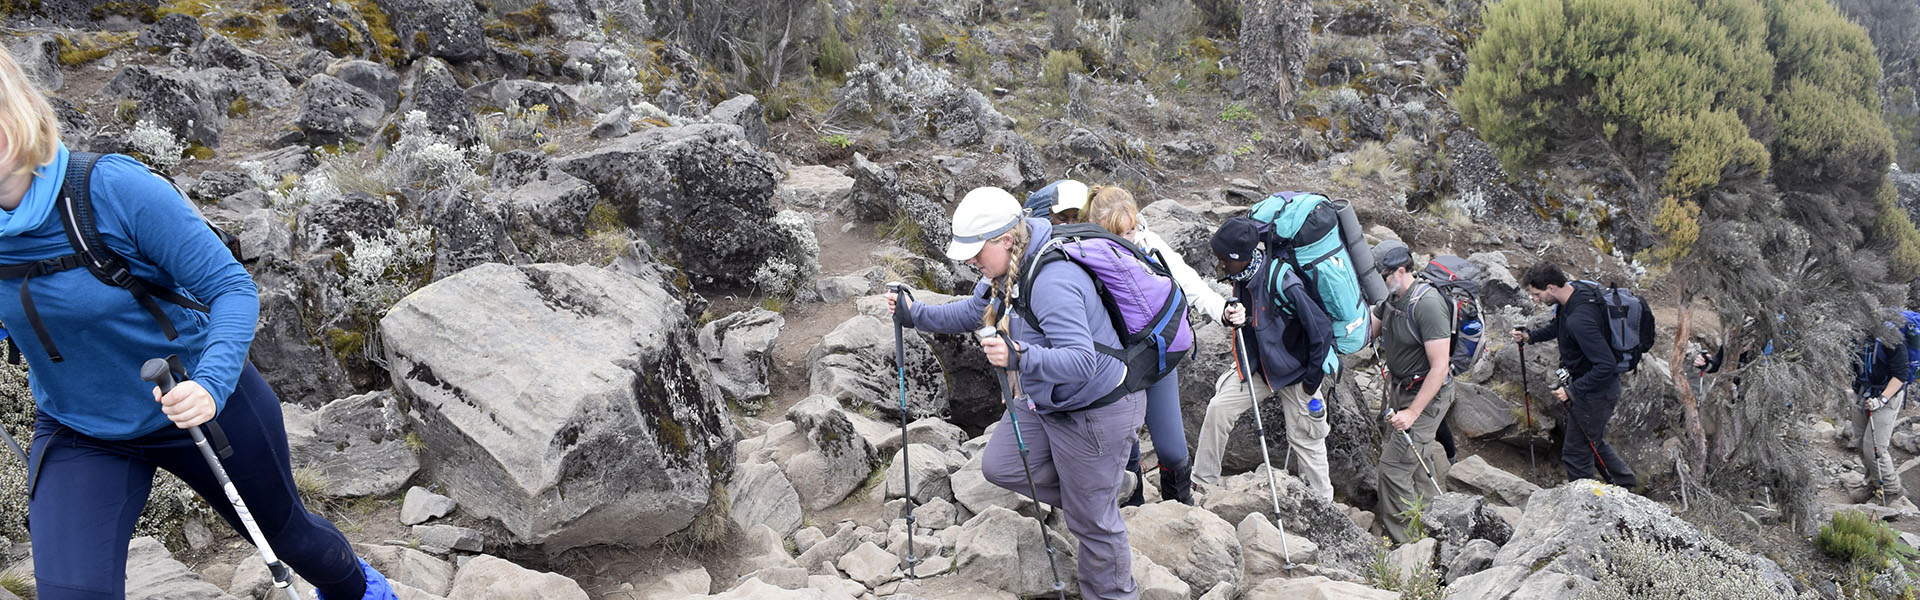 Tips and planning for climbing Kilimanjaro success